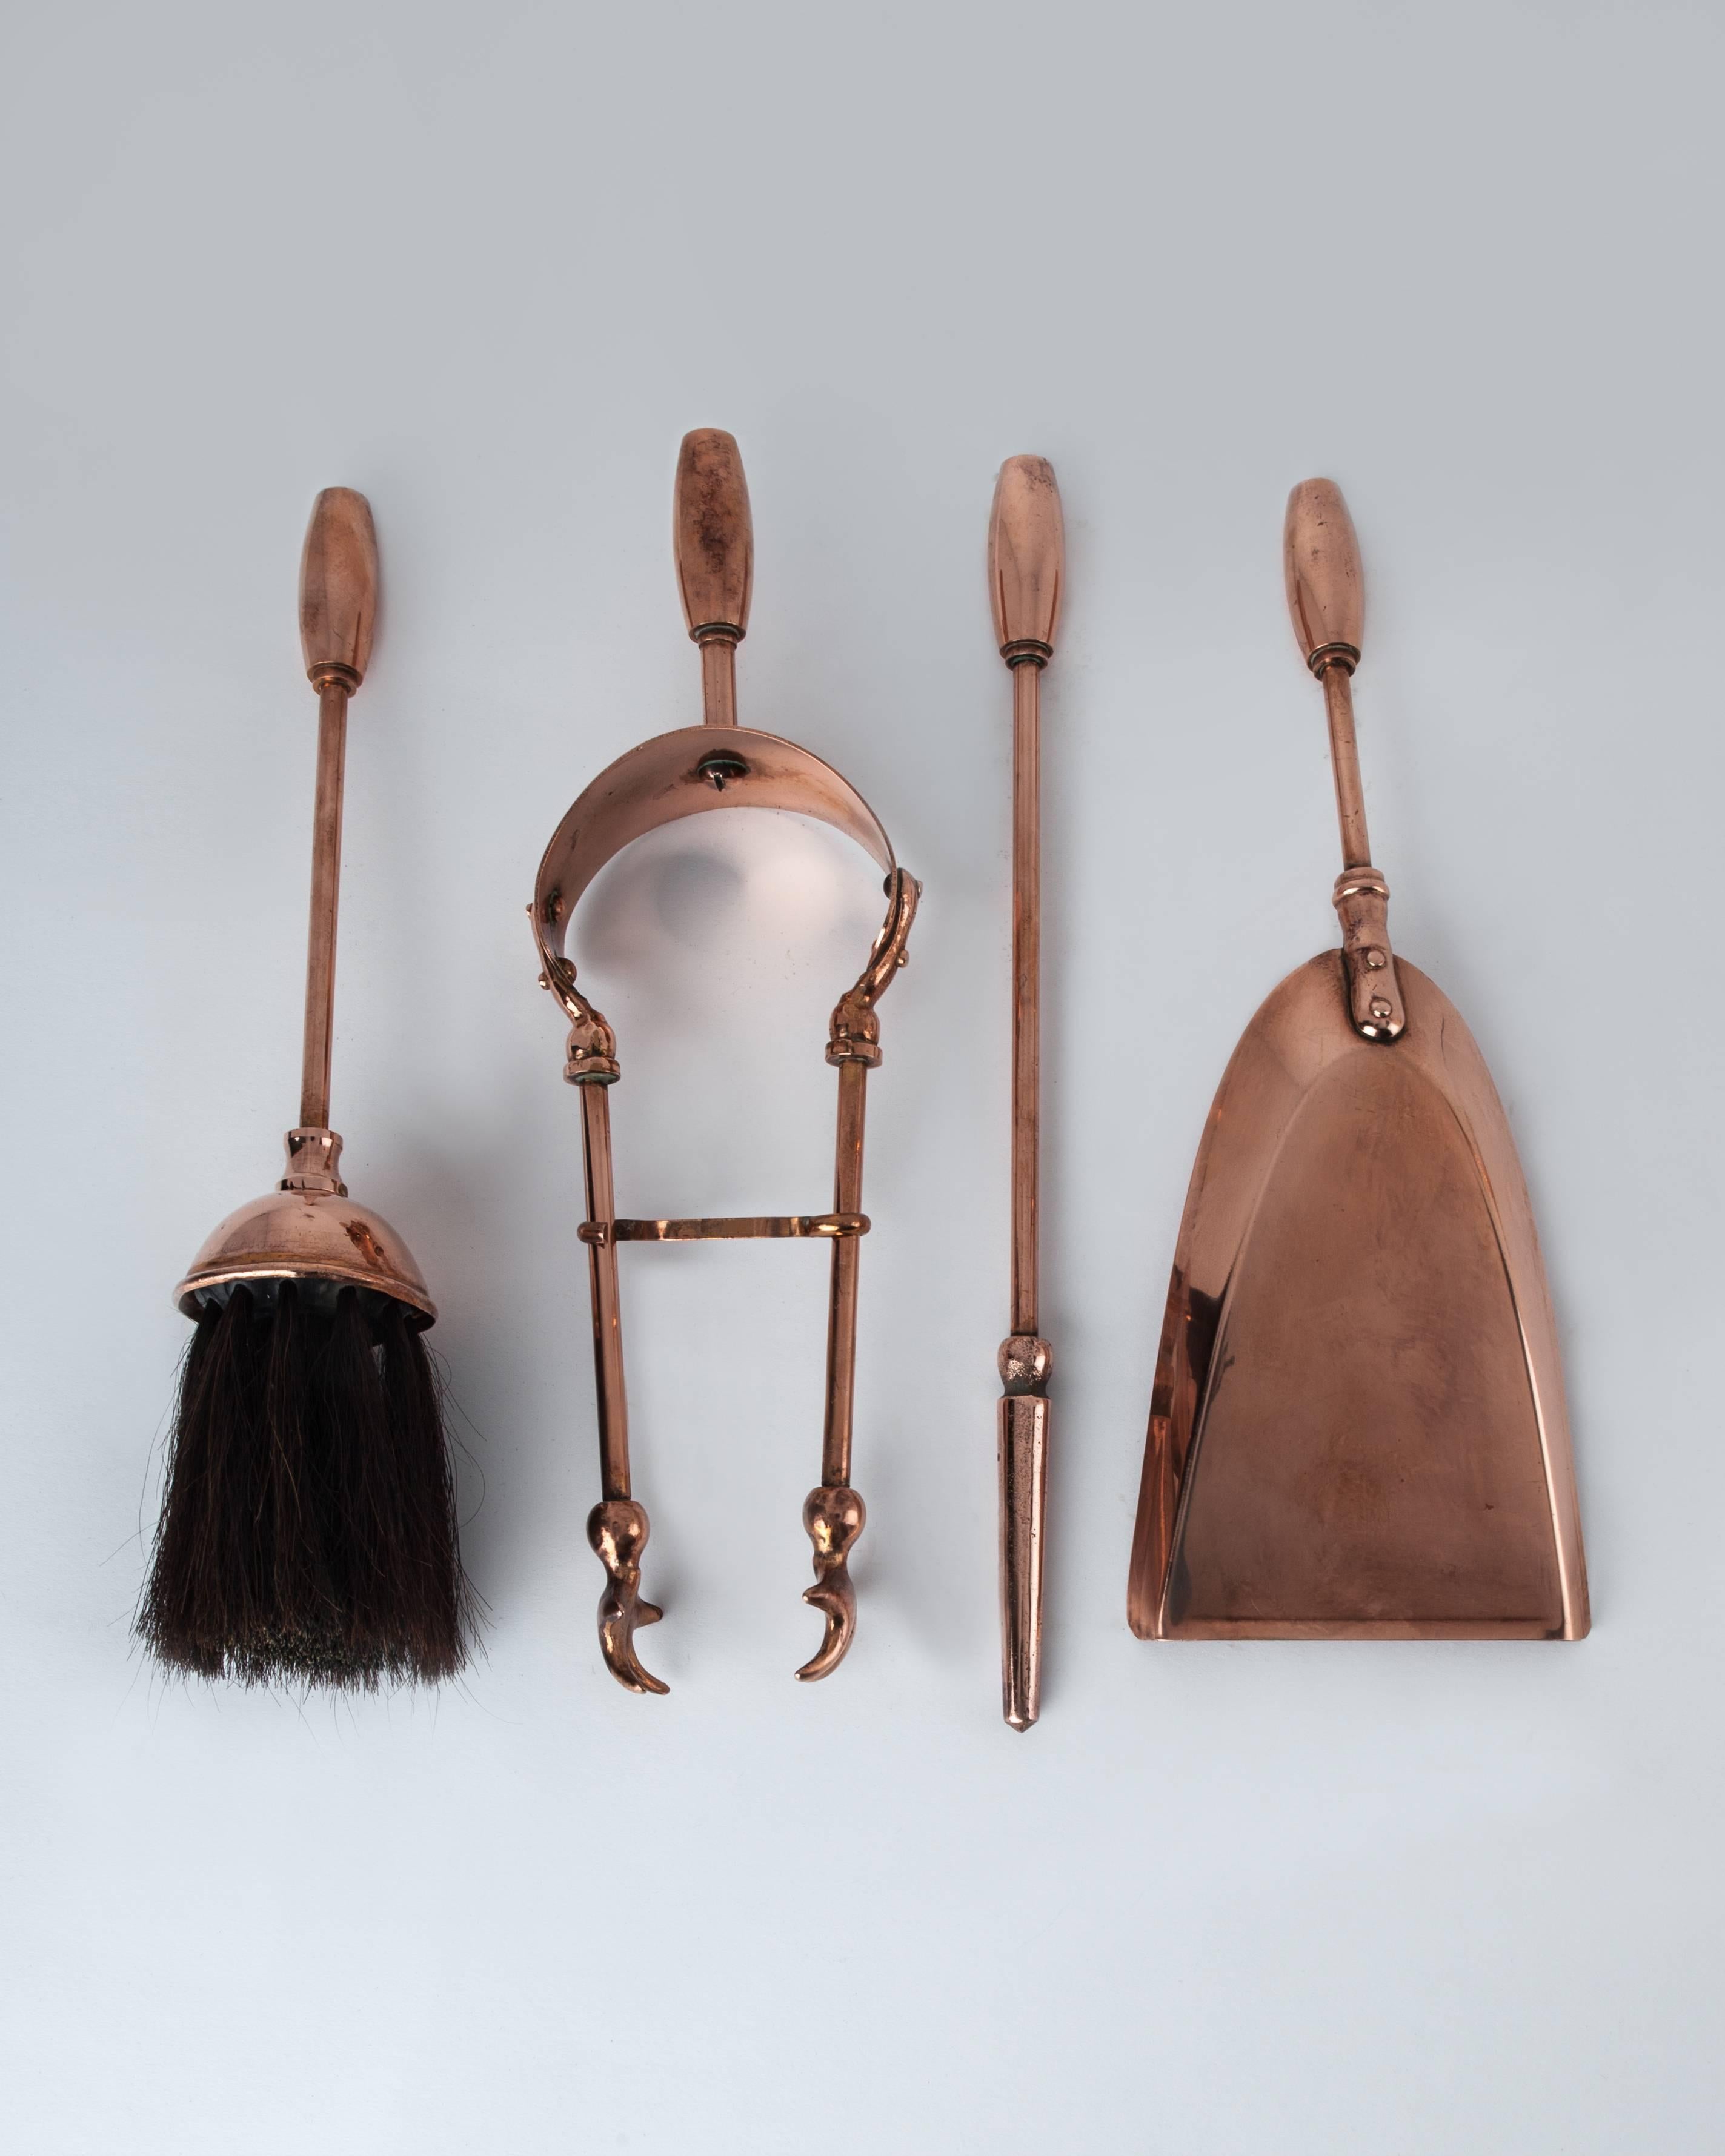 AFP0516
A four-piece copper fireplace tool set including a pair of tongs, poker, brush, and shovel hanging on a matching stand.

Dimensions:
Overall: 14-1/2